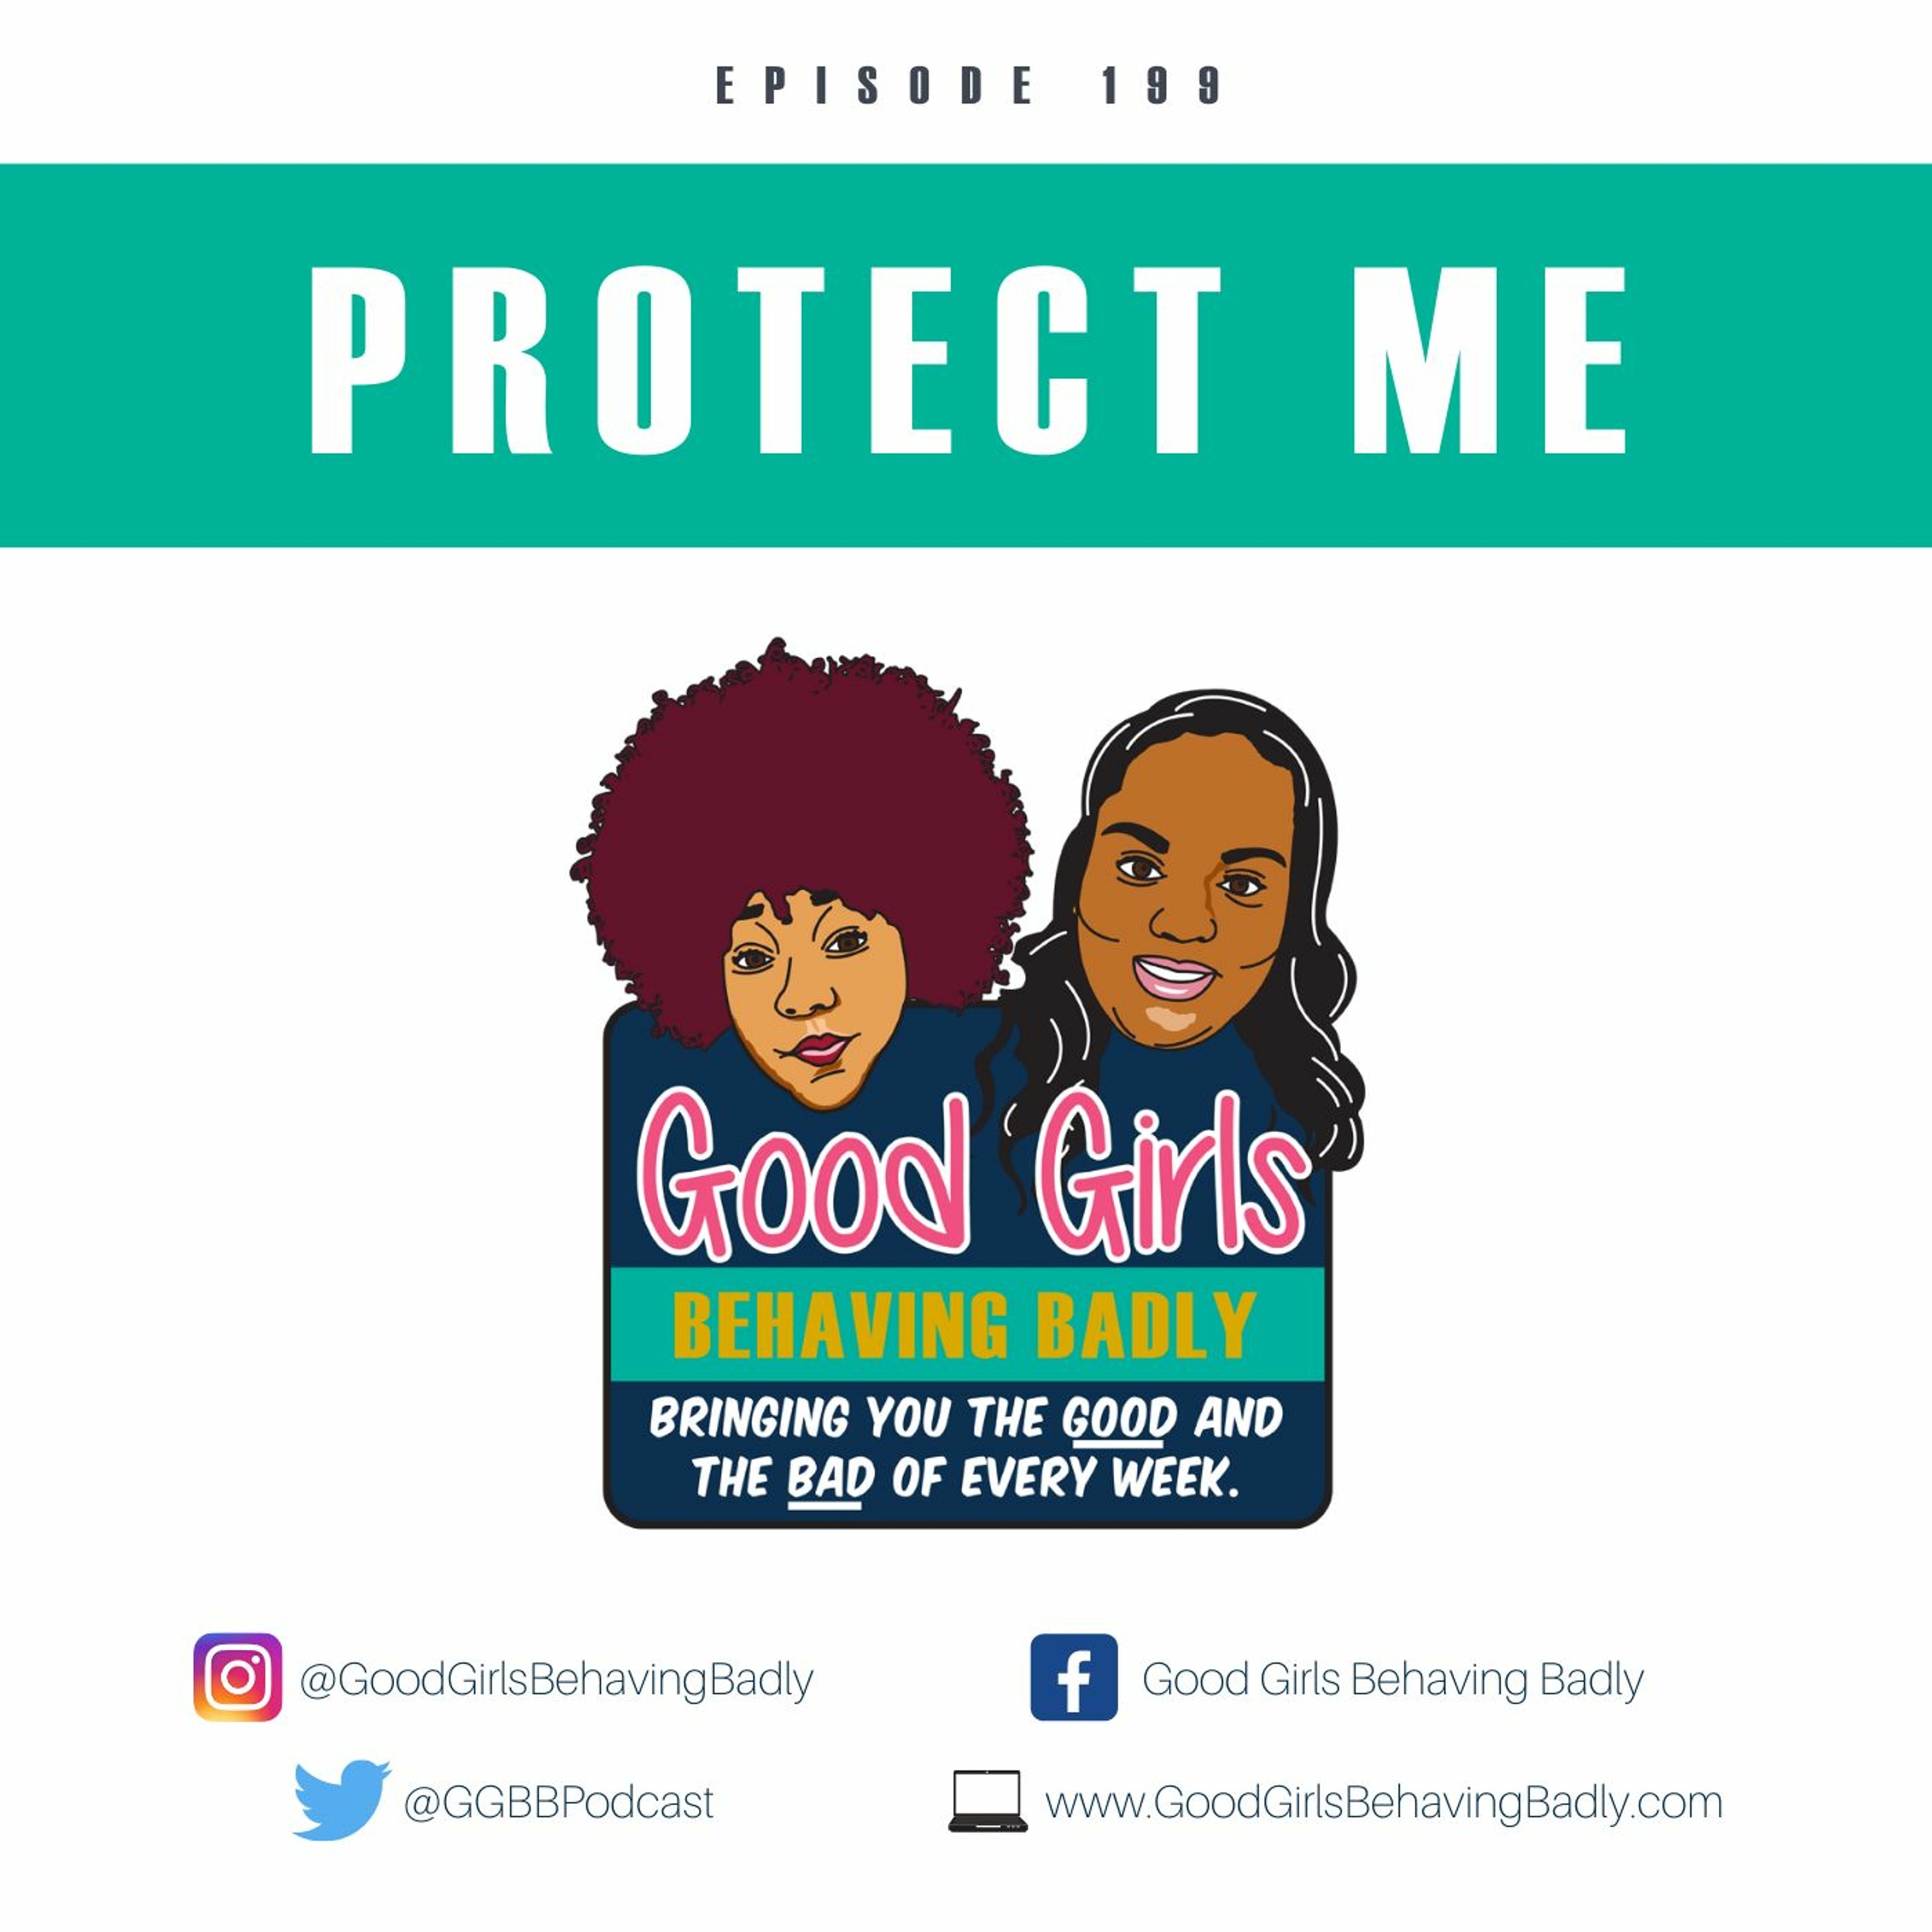 Episode 199: Protect Me